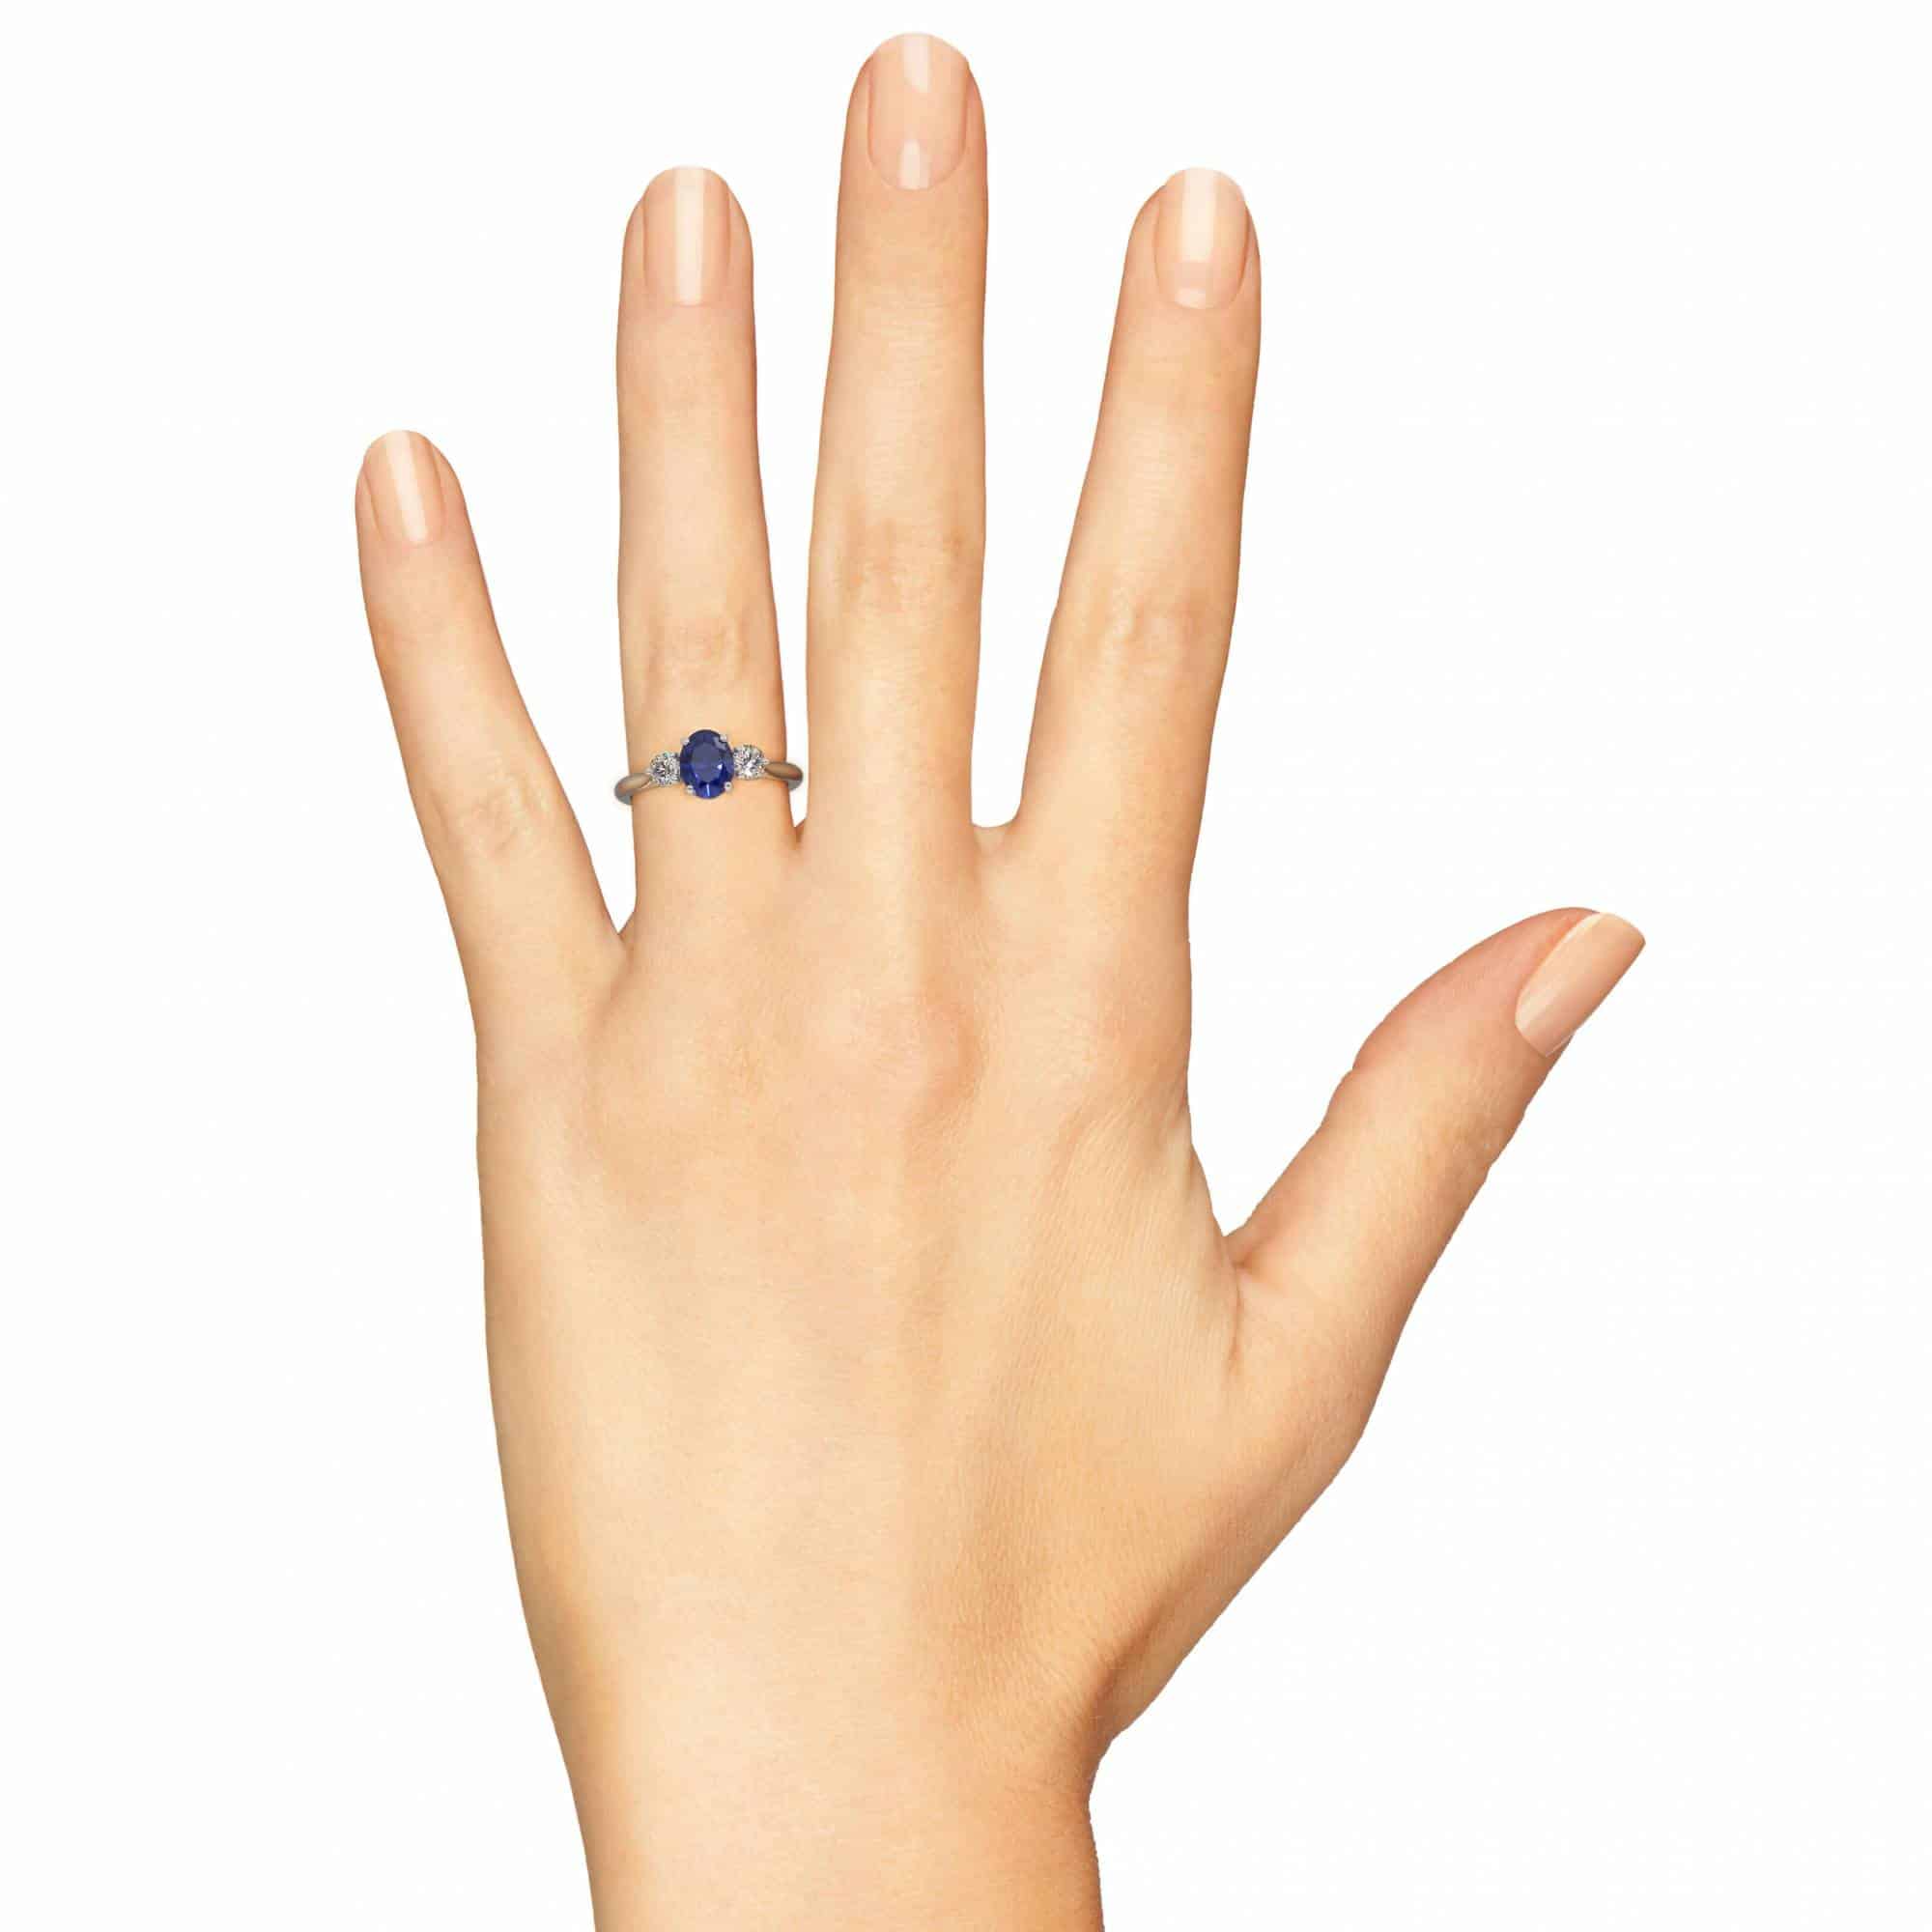 10+ Of the Best Ethical Engagement Rings - Eluxe Magazine